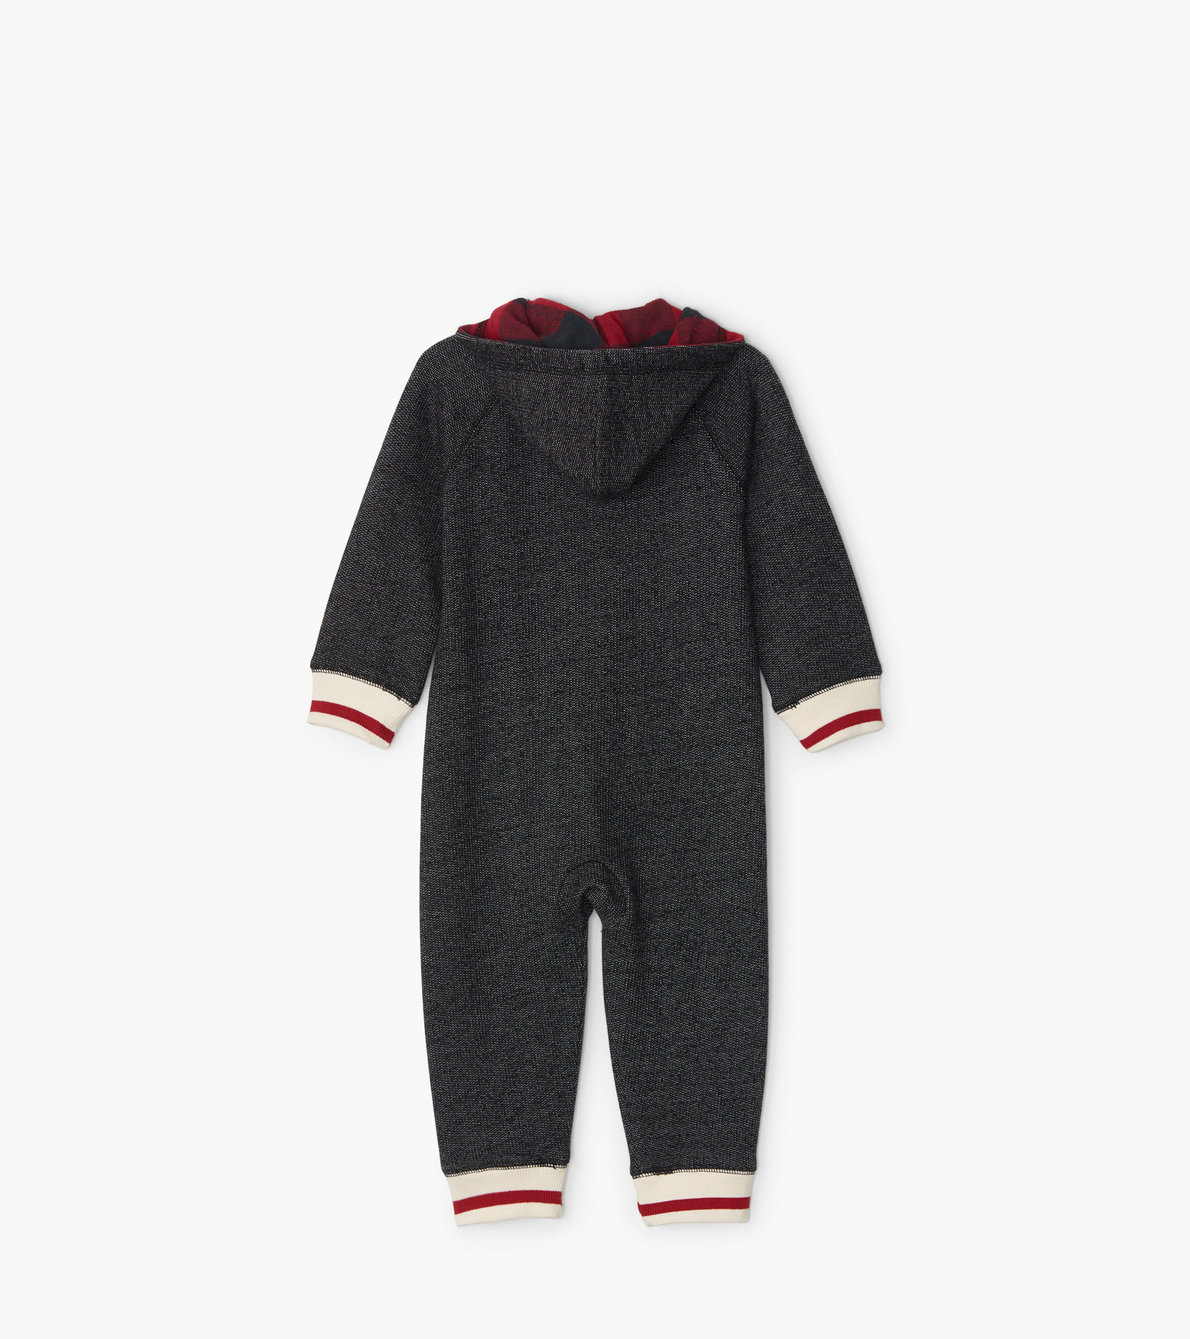 View larger image of Buffalo Plaid Moose Baby Heritage Full Zip Romper